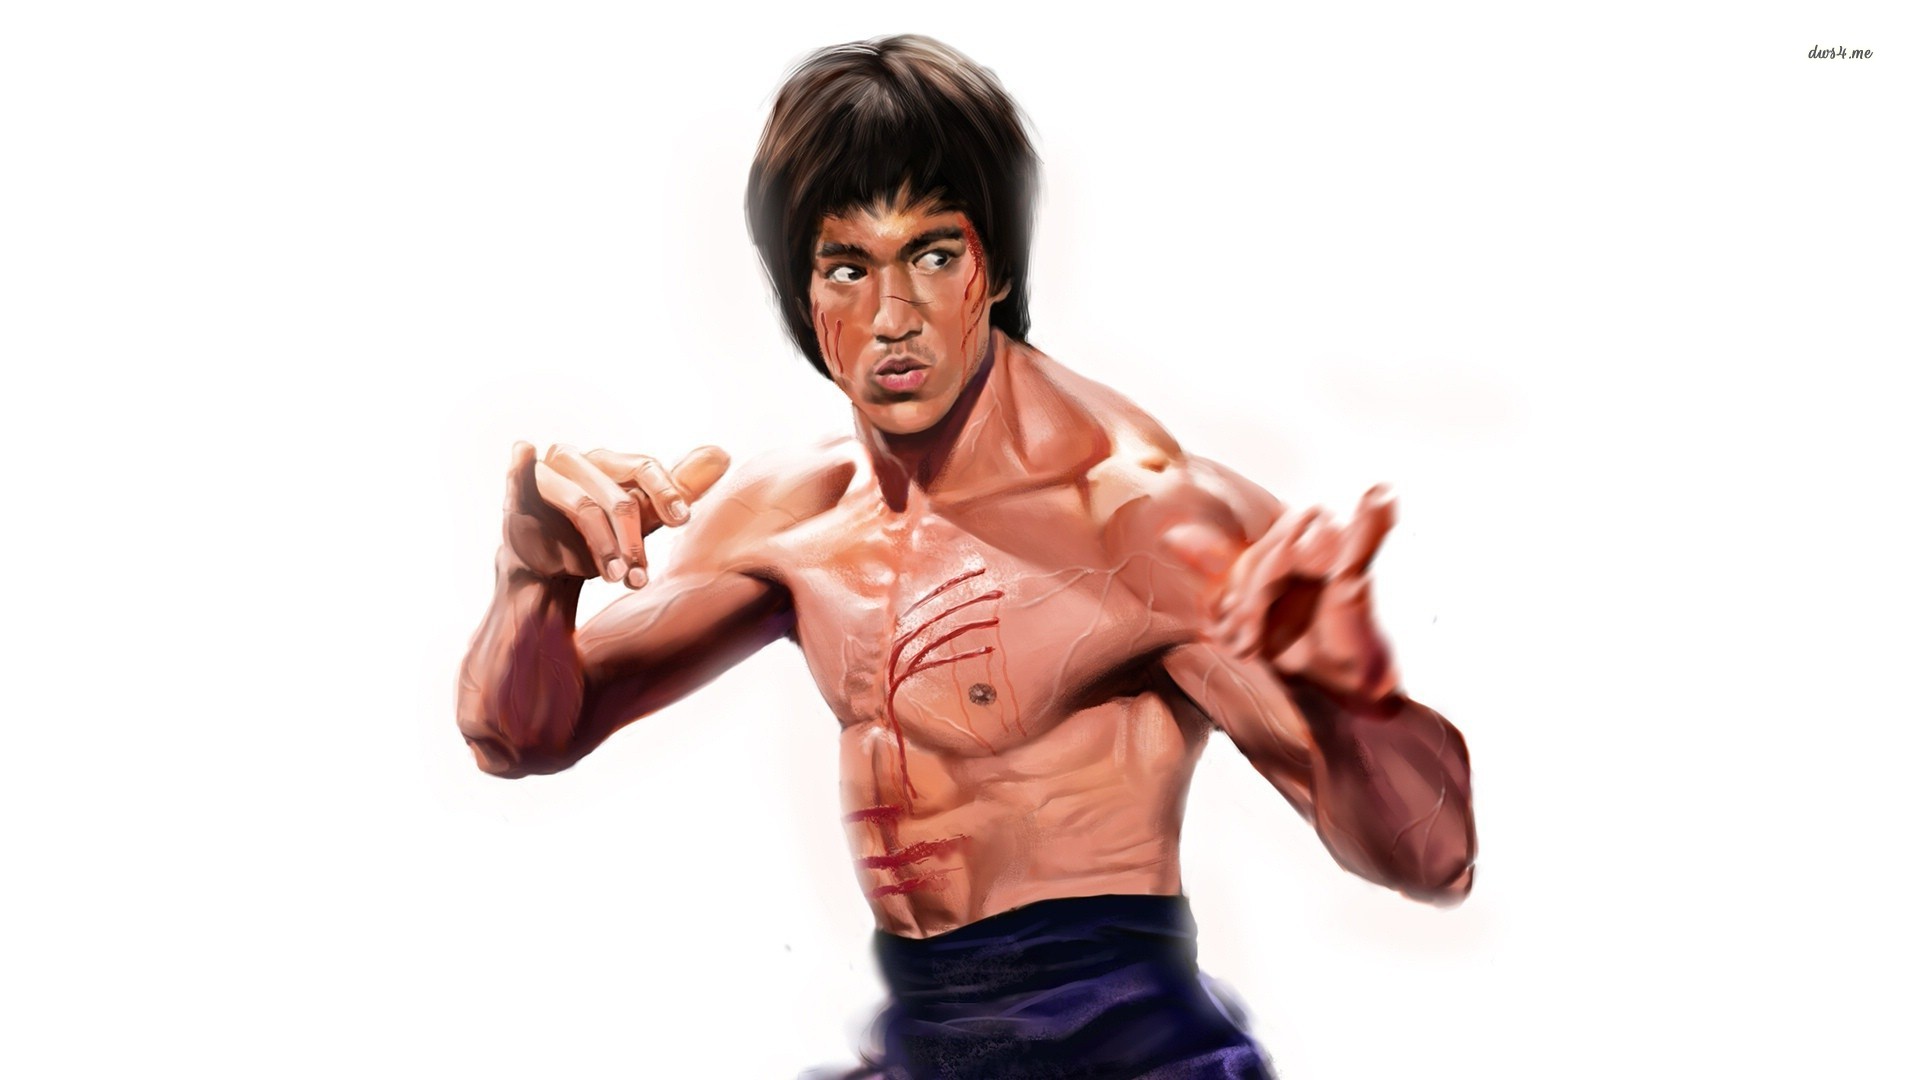 Bruce Lee Wallpapers HD A3